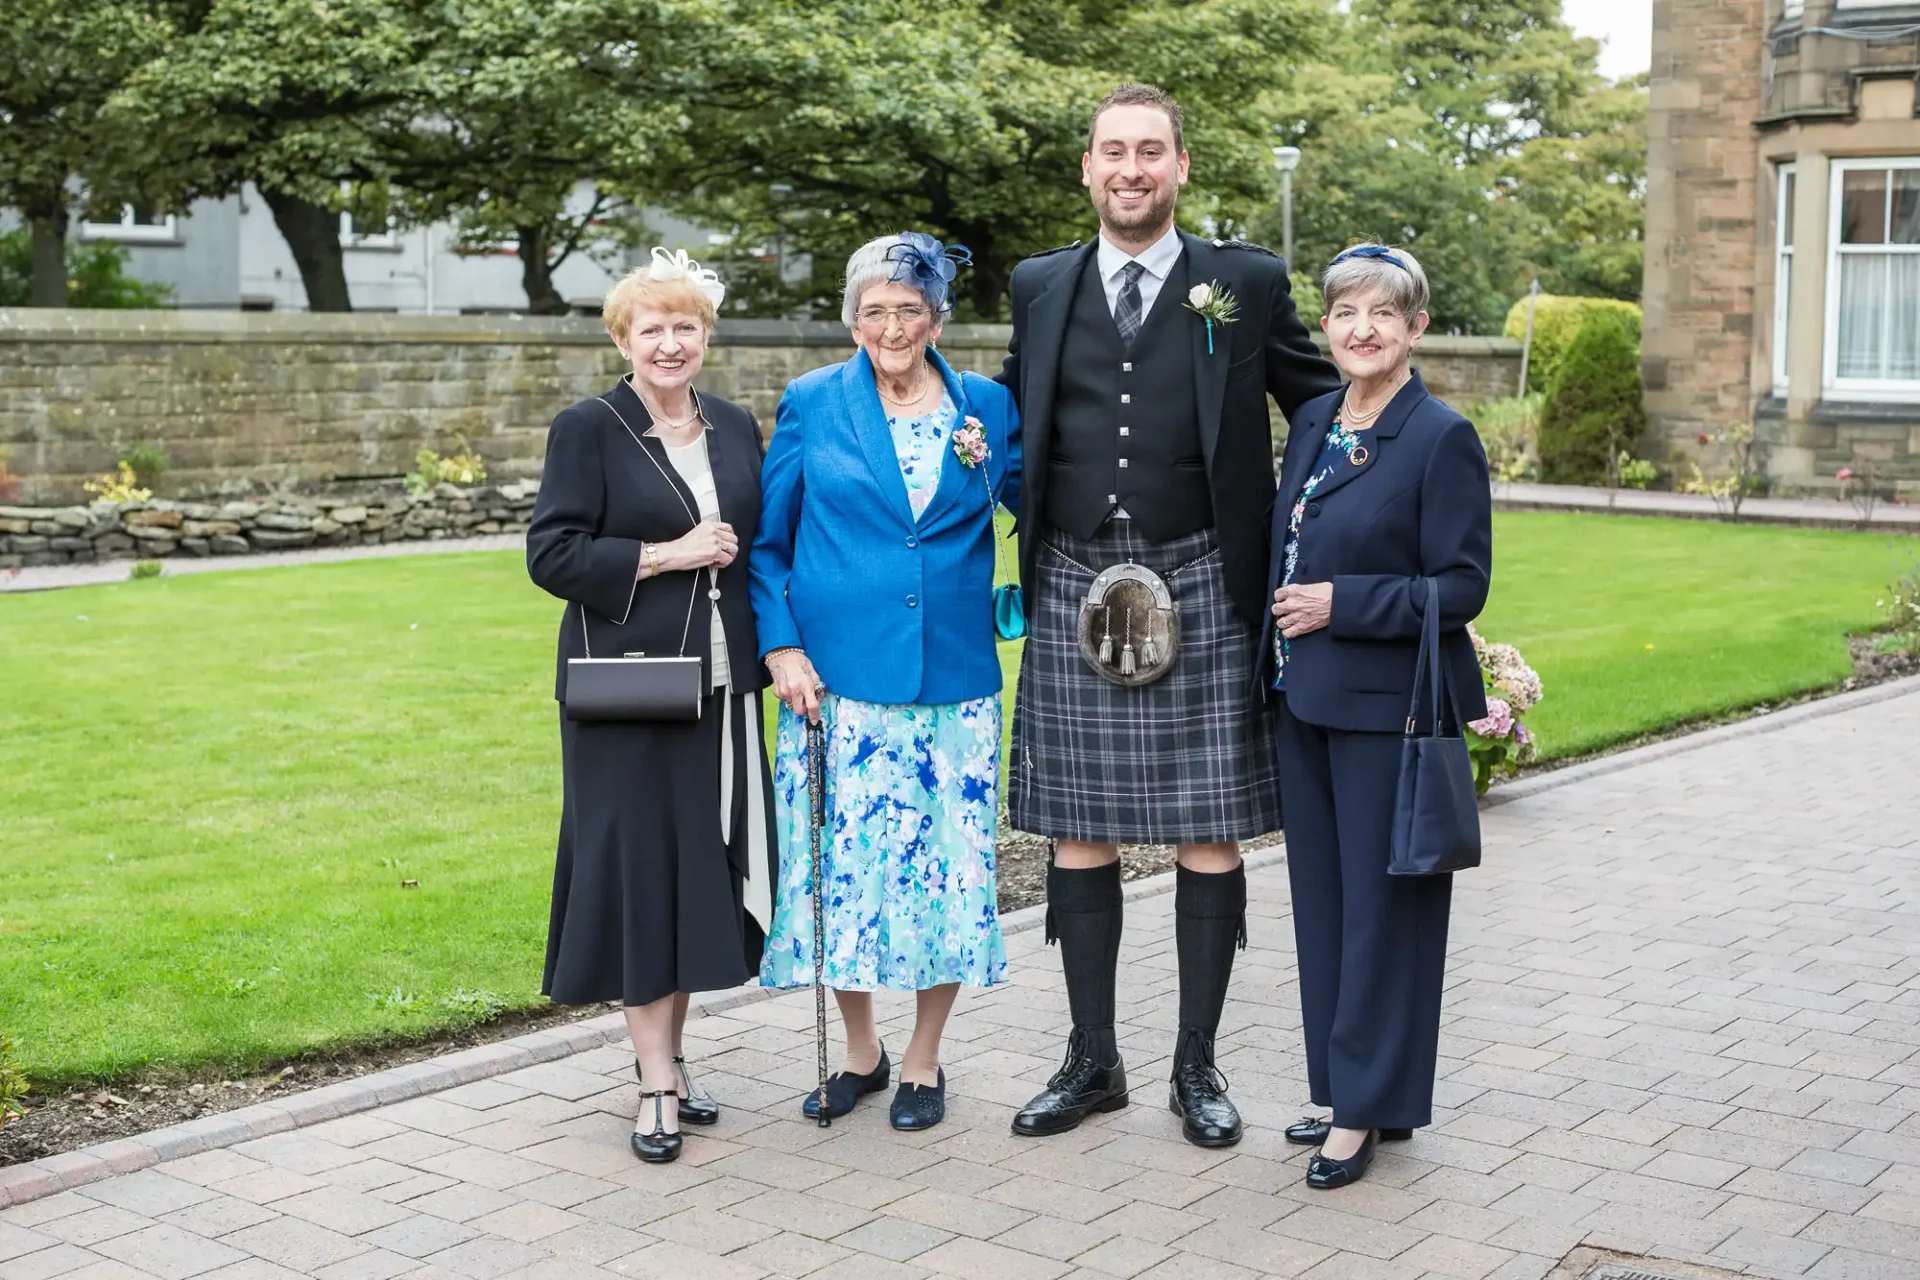 Four people in formal attire, including a man in a kilt, posing together at an outdoor event.